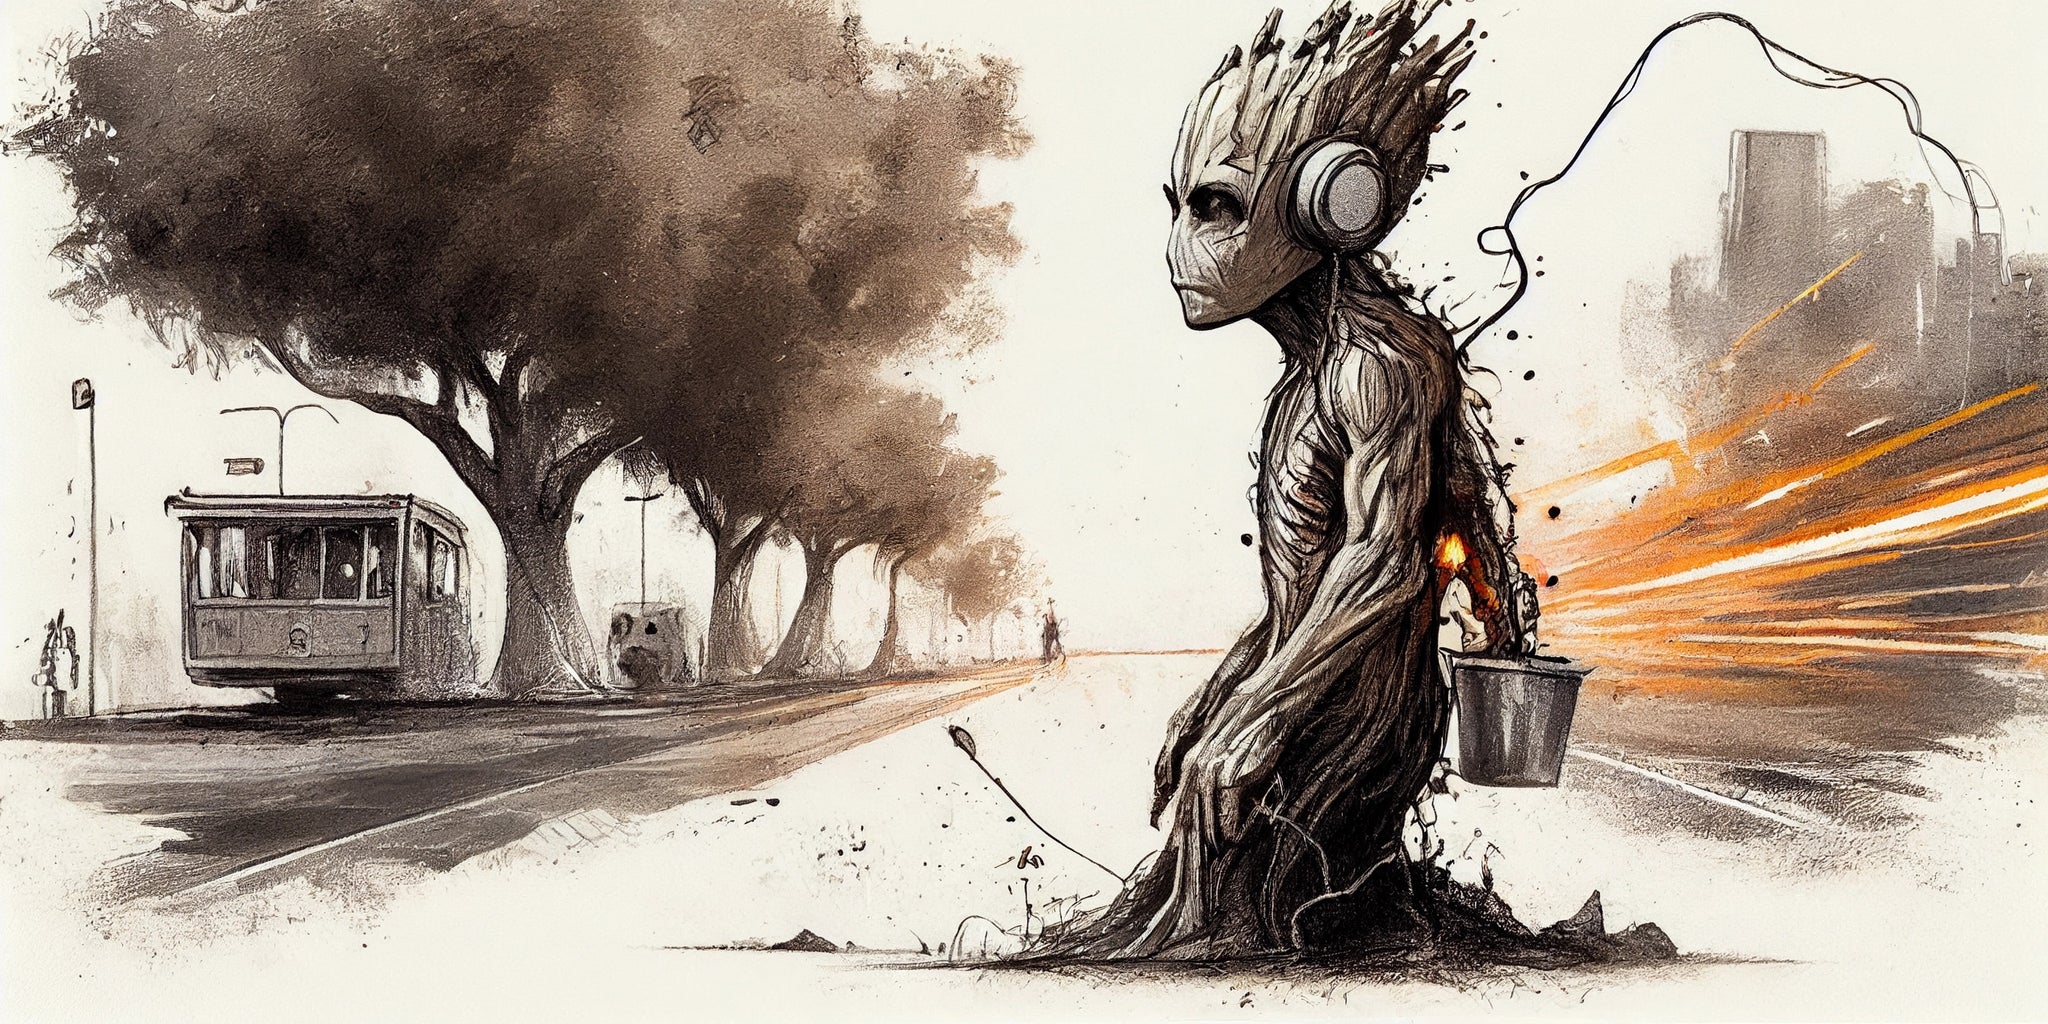 Bring Marvel Magic to Your Home with our Playful Groot Digital Pencil Sketch - Perfect for Kids' Rooms and Marvel Fans